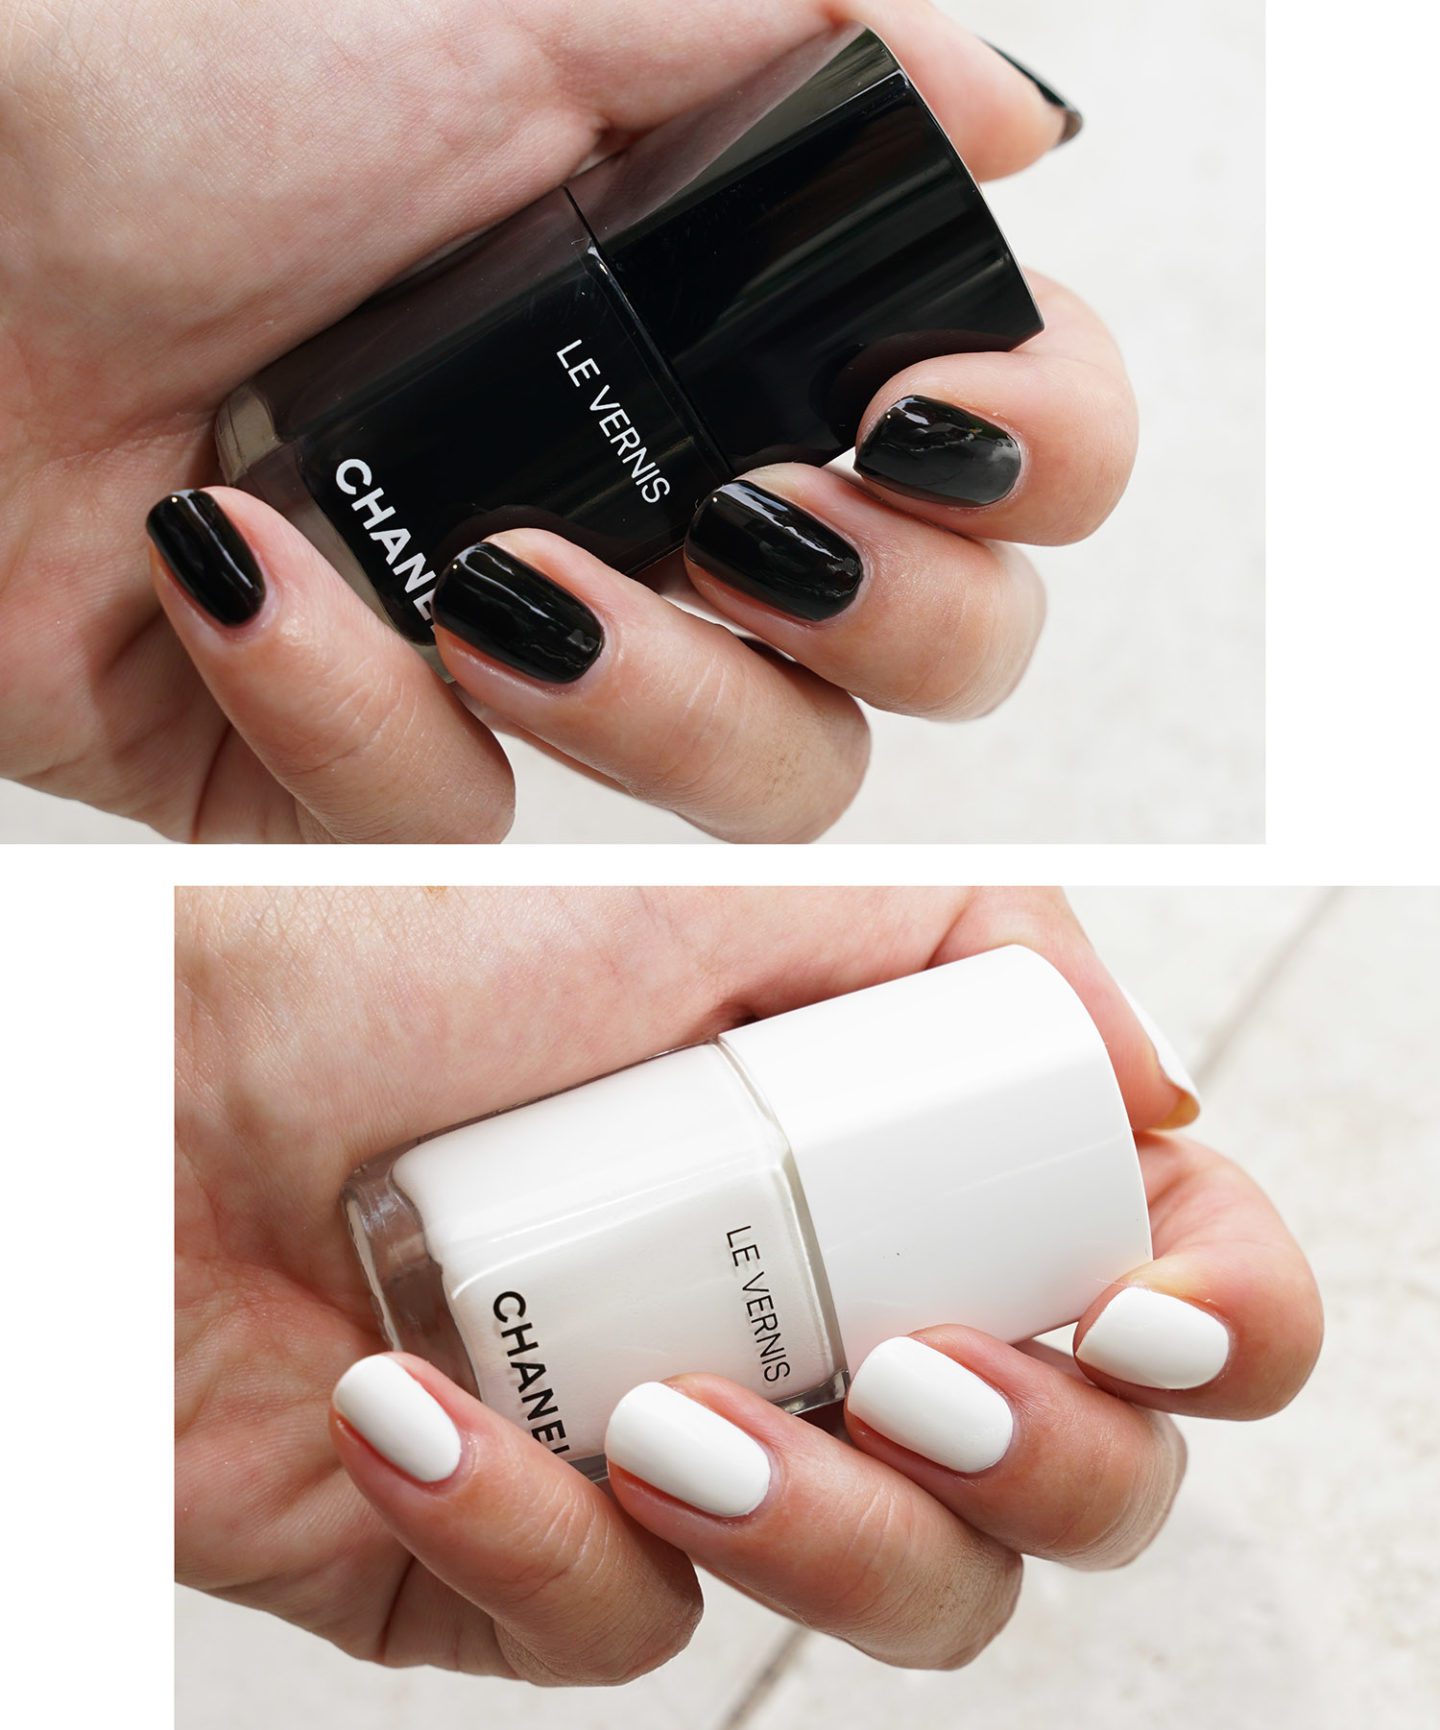 Chanel Fall 2019 Le Vernis Pure Black and Pure White swatches